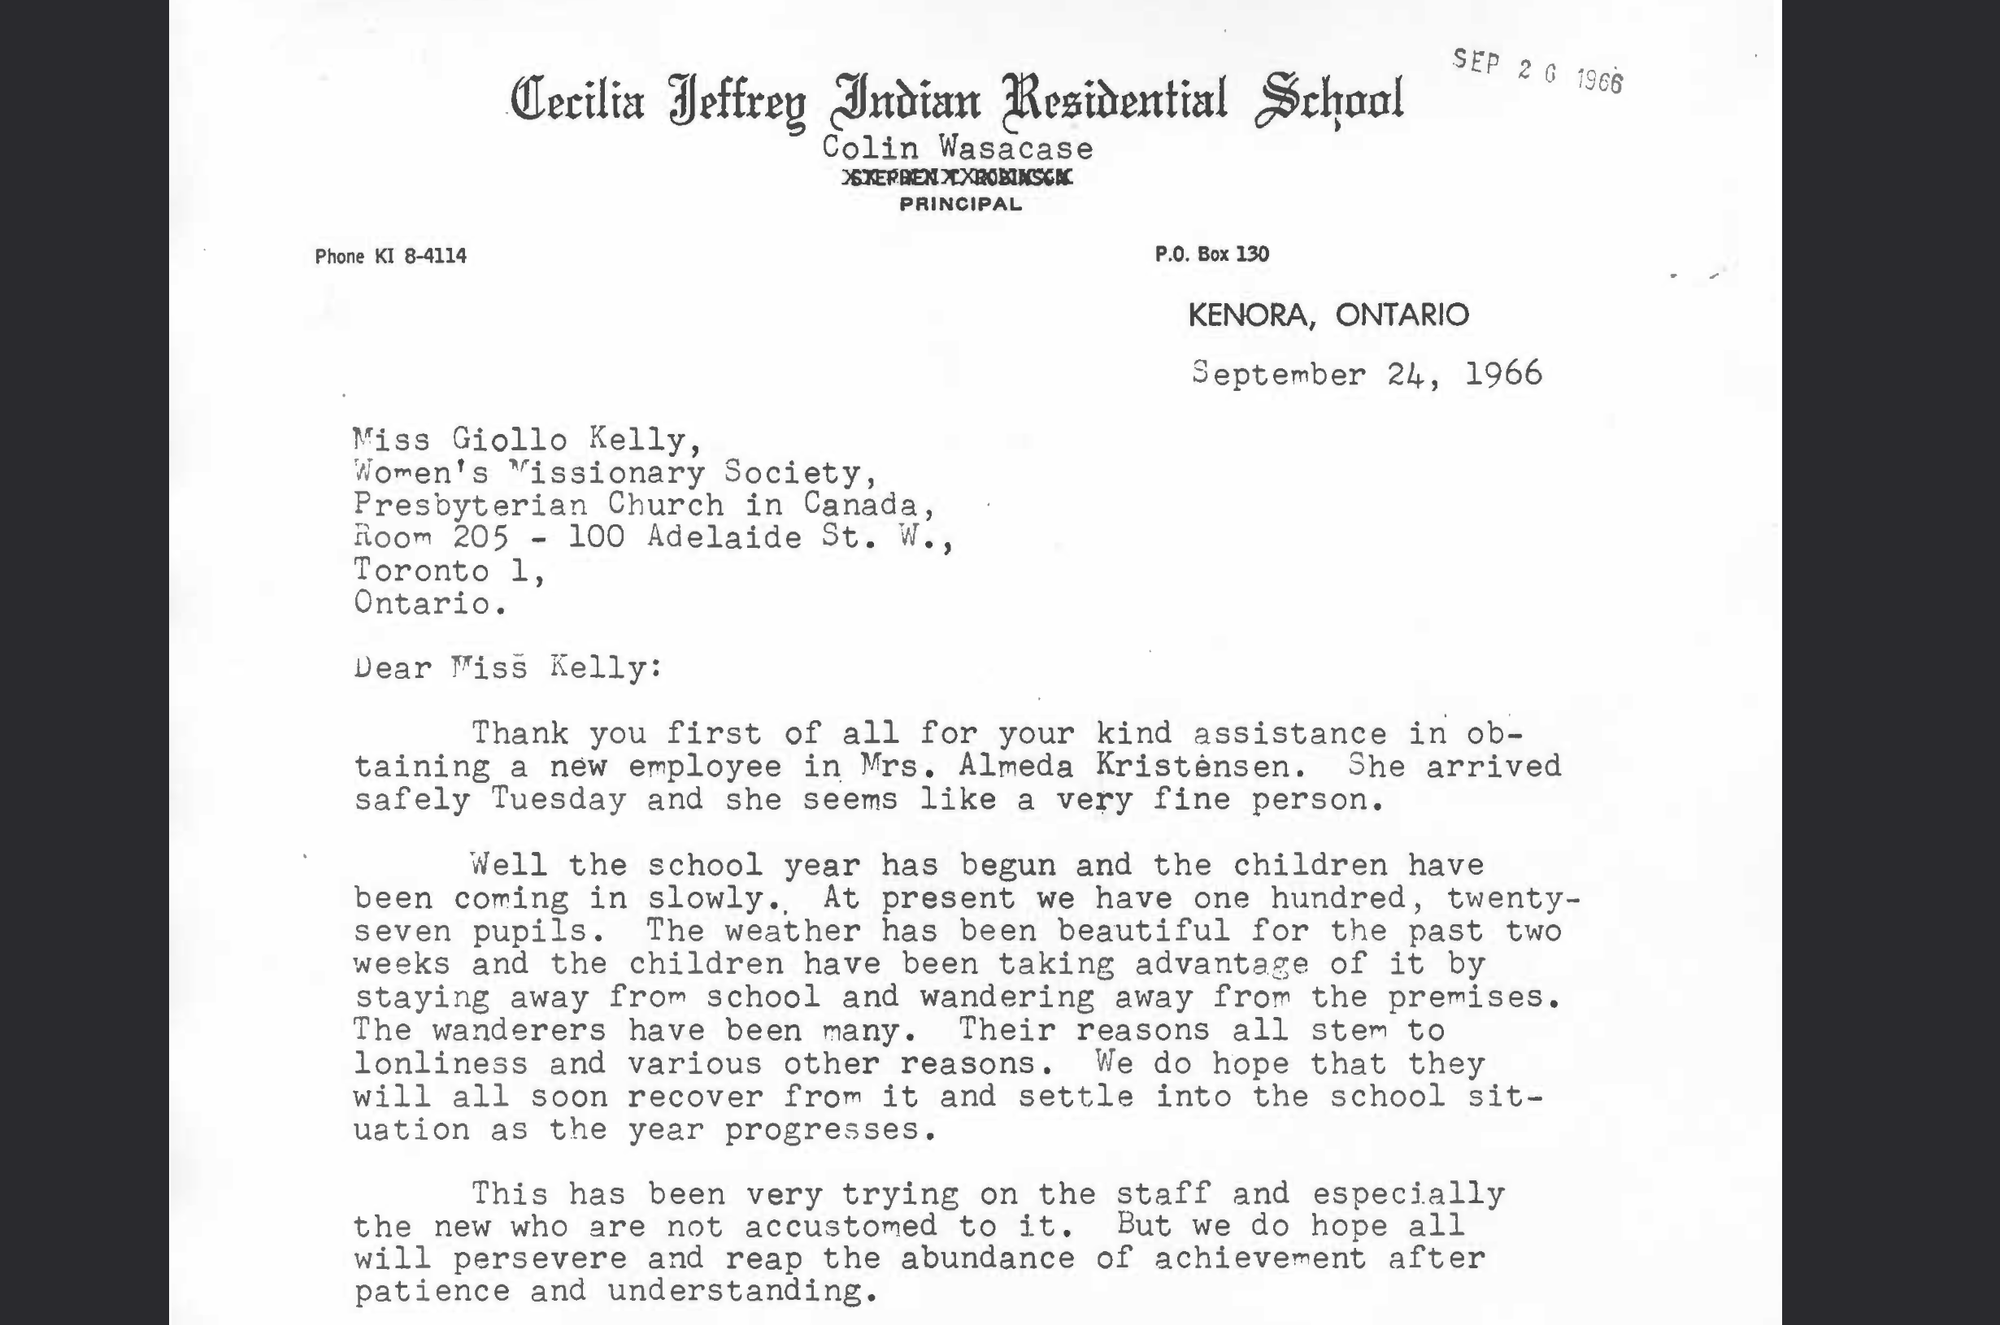 A section of a typewritten letter from Colin Wasacase to Miss Giollo Kelly of the Women's Missionary Society, dated 24 September 1966. 